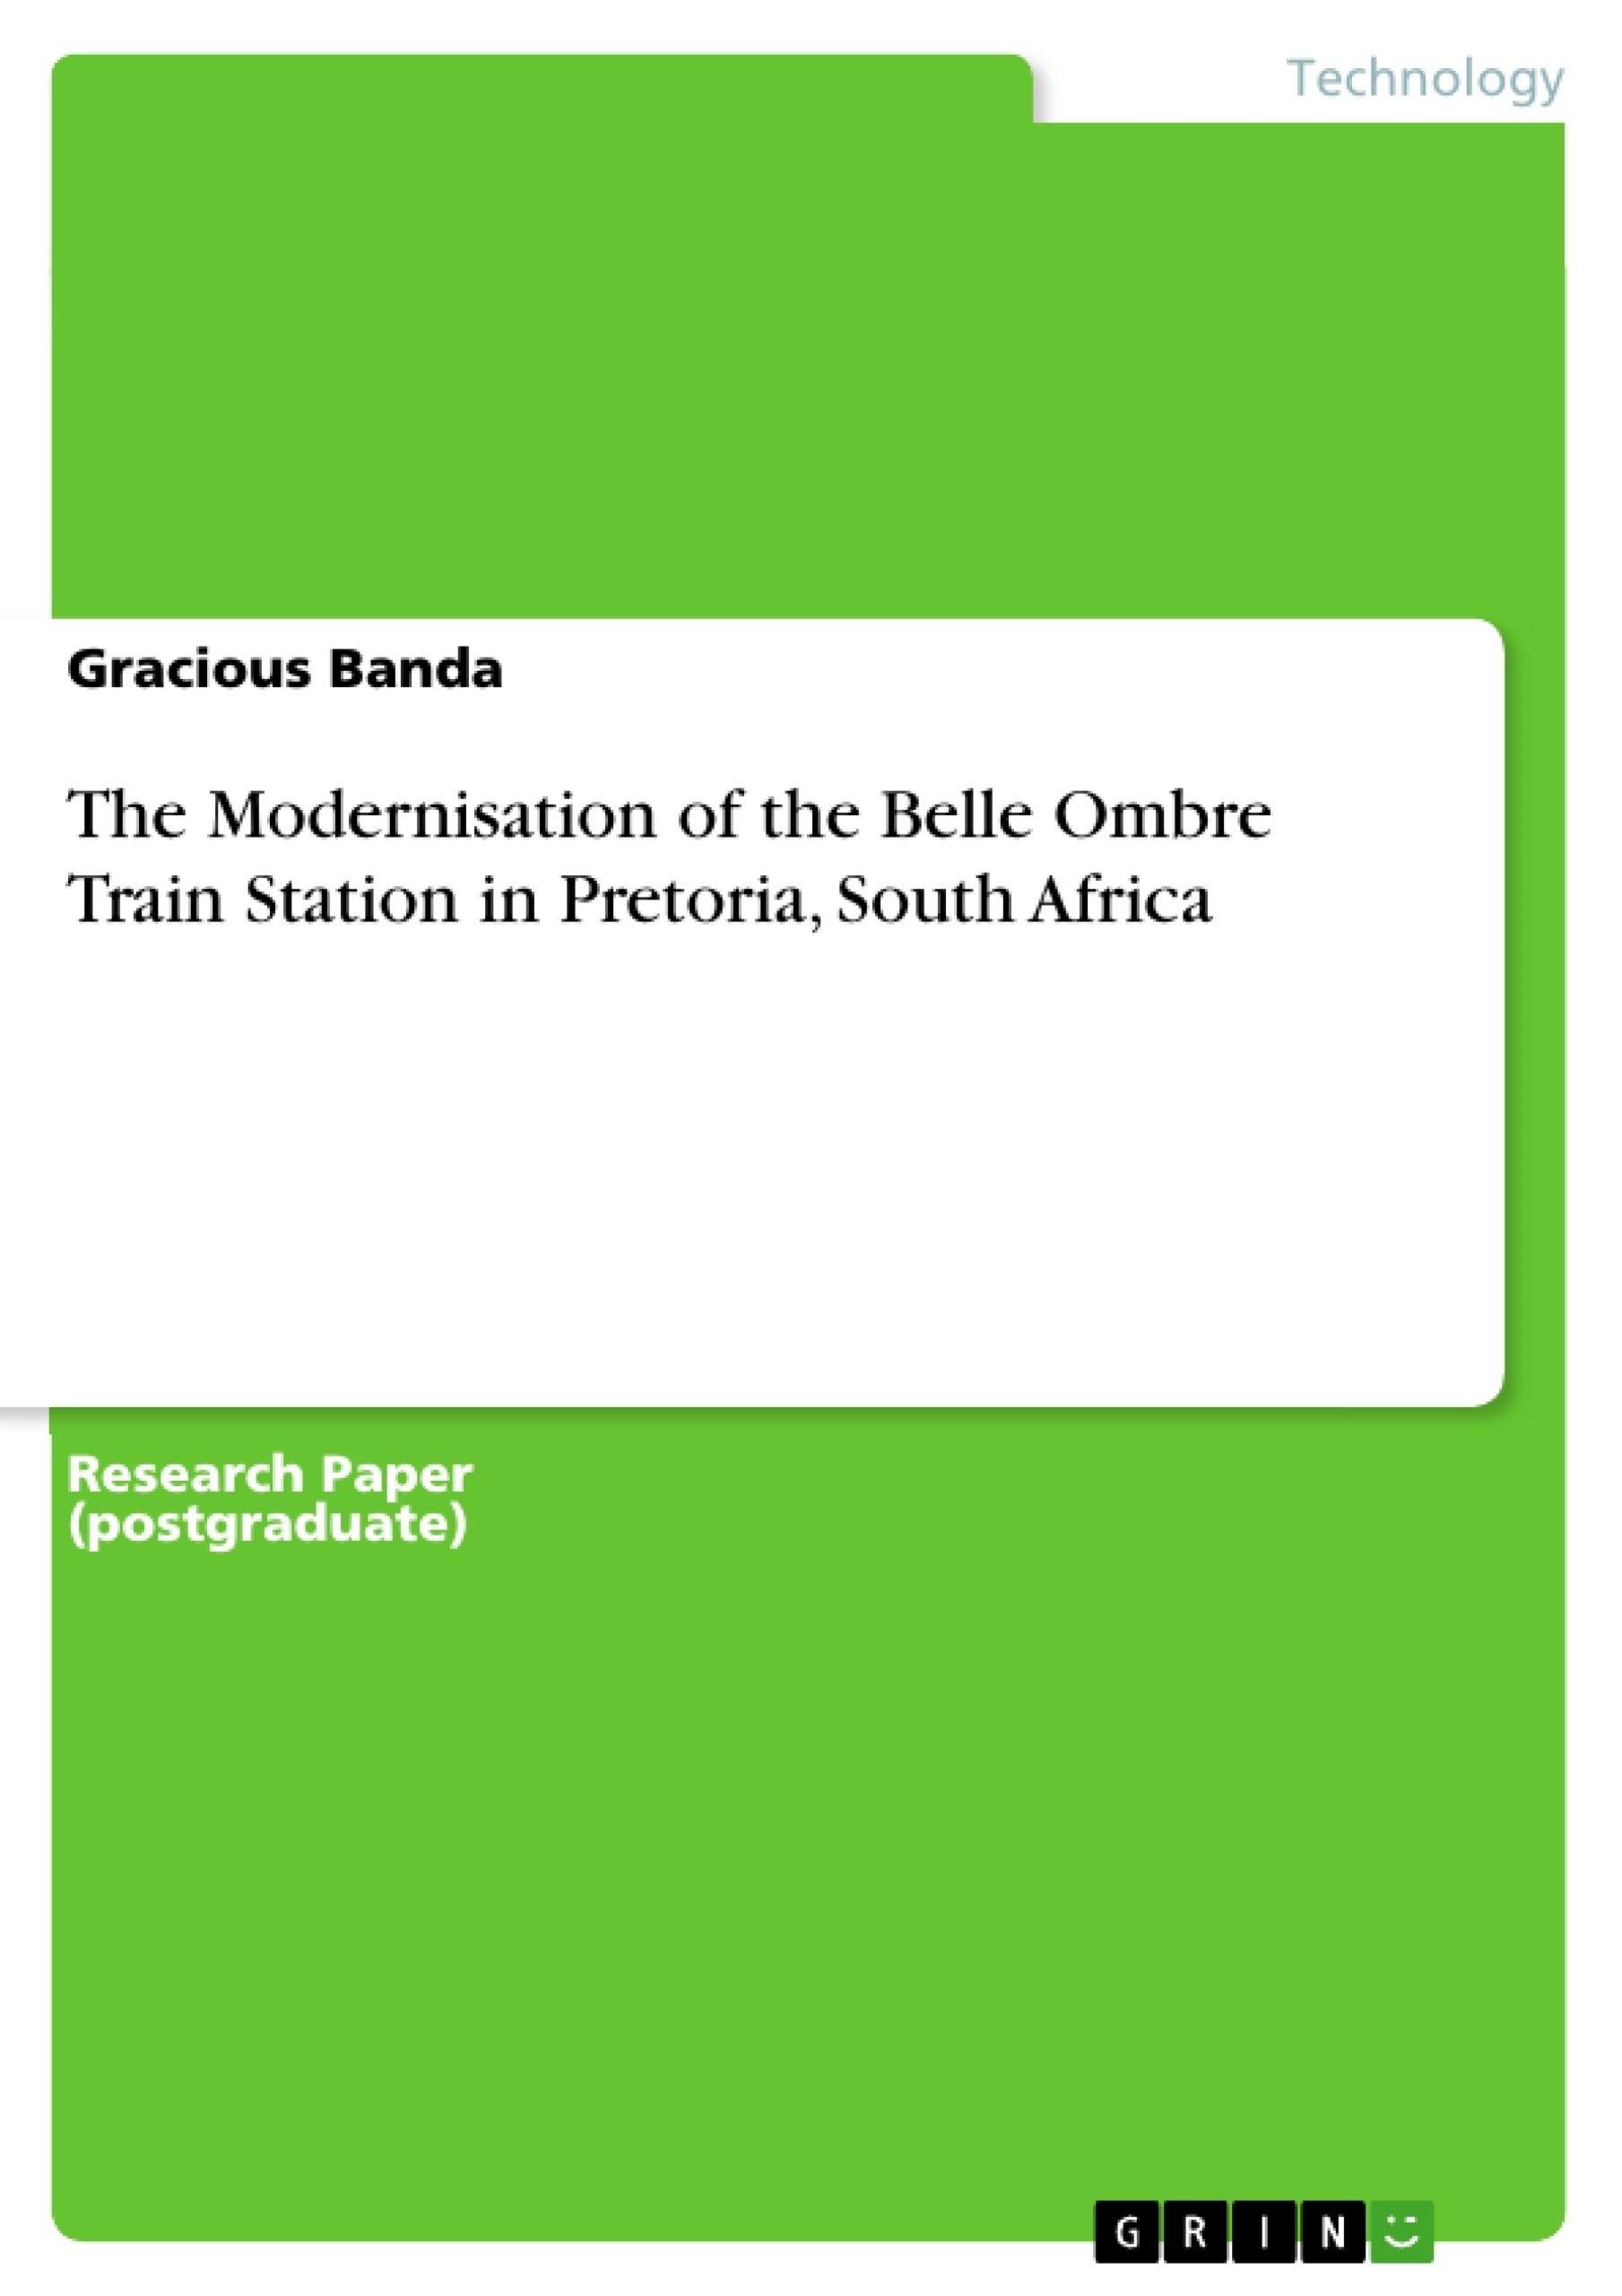 Title: The Modernisation of the Belle Ombre Train Station in Pretoria, South Africa